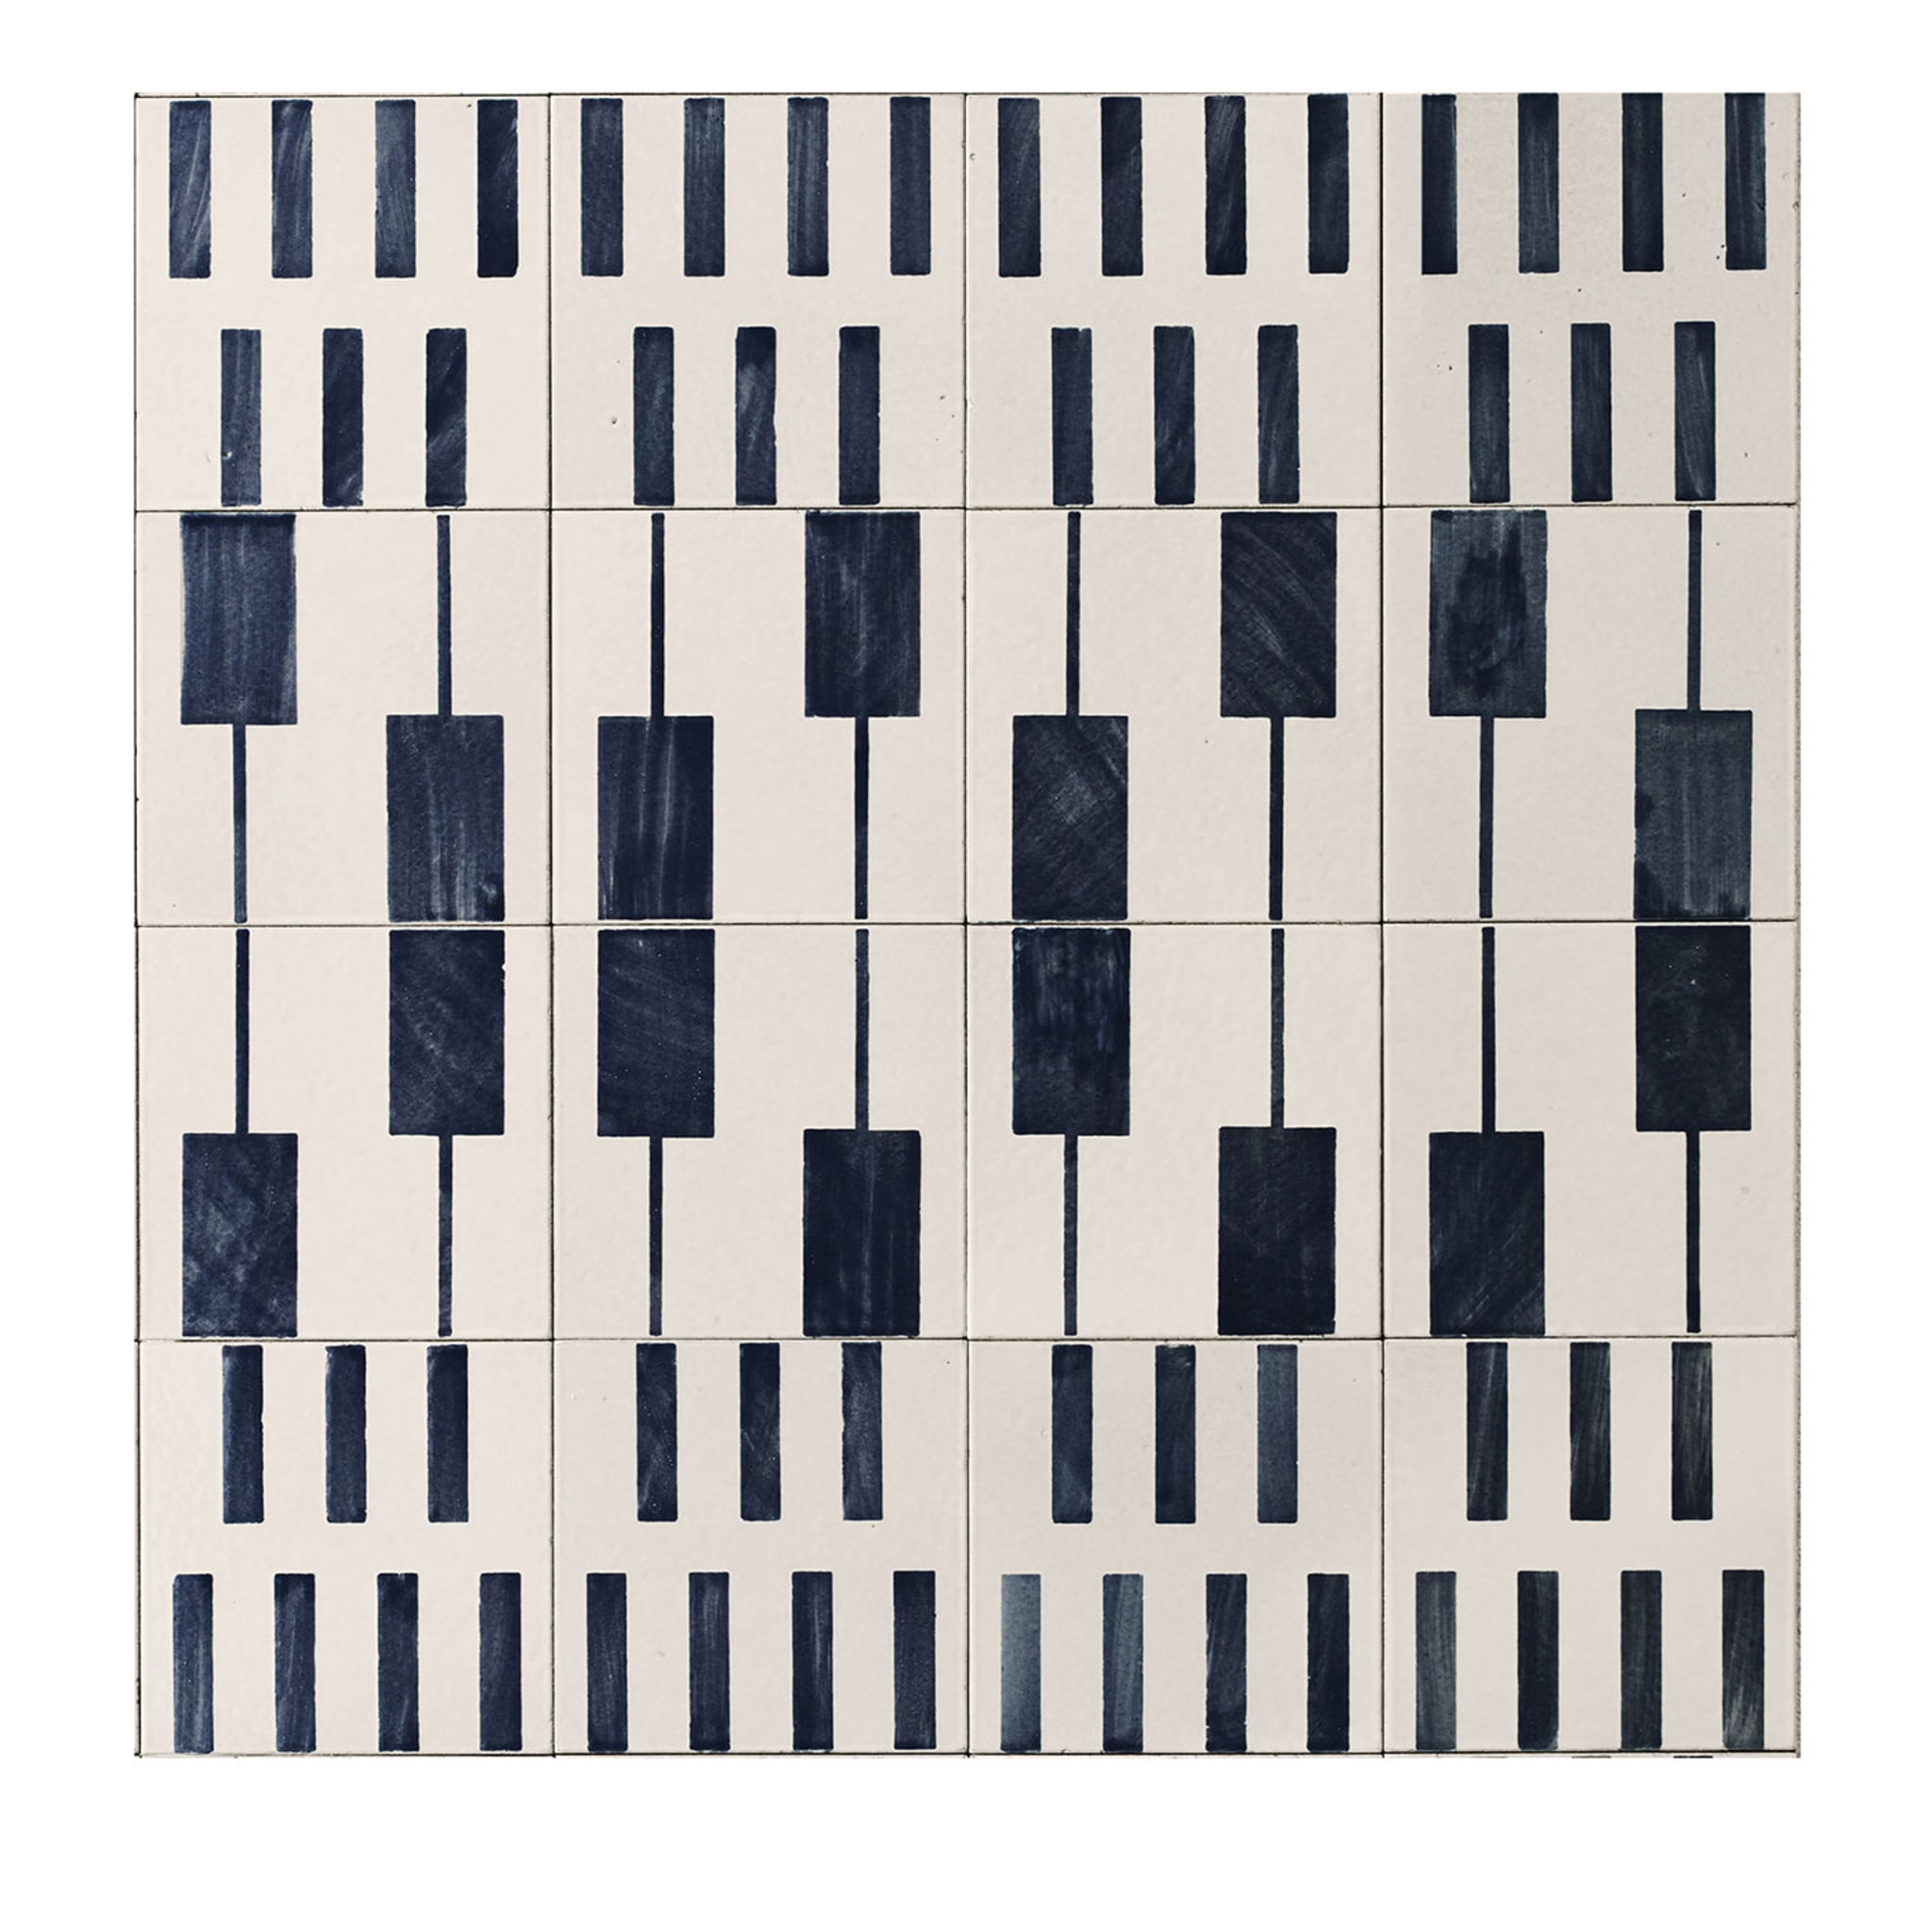 Alfabeto Set of 44 White and Blue Tiles by Margherita Rui - Main view